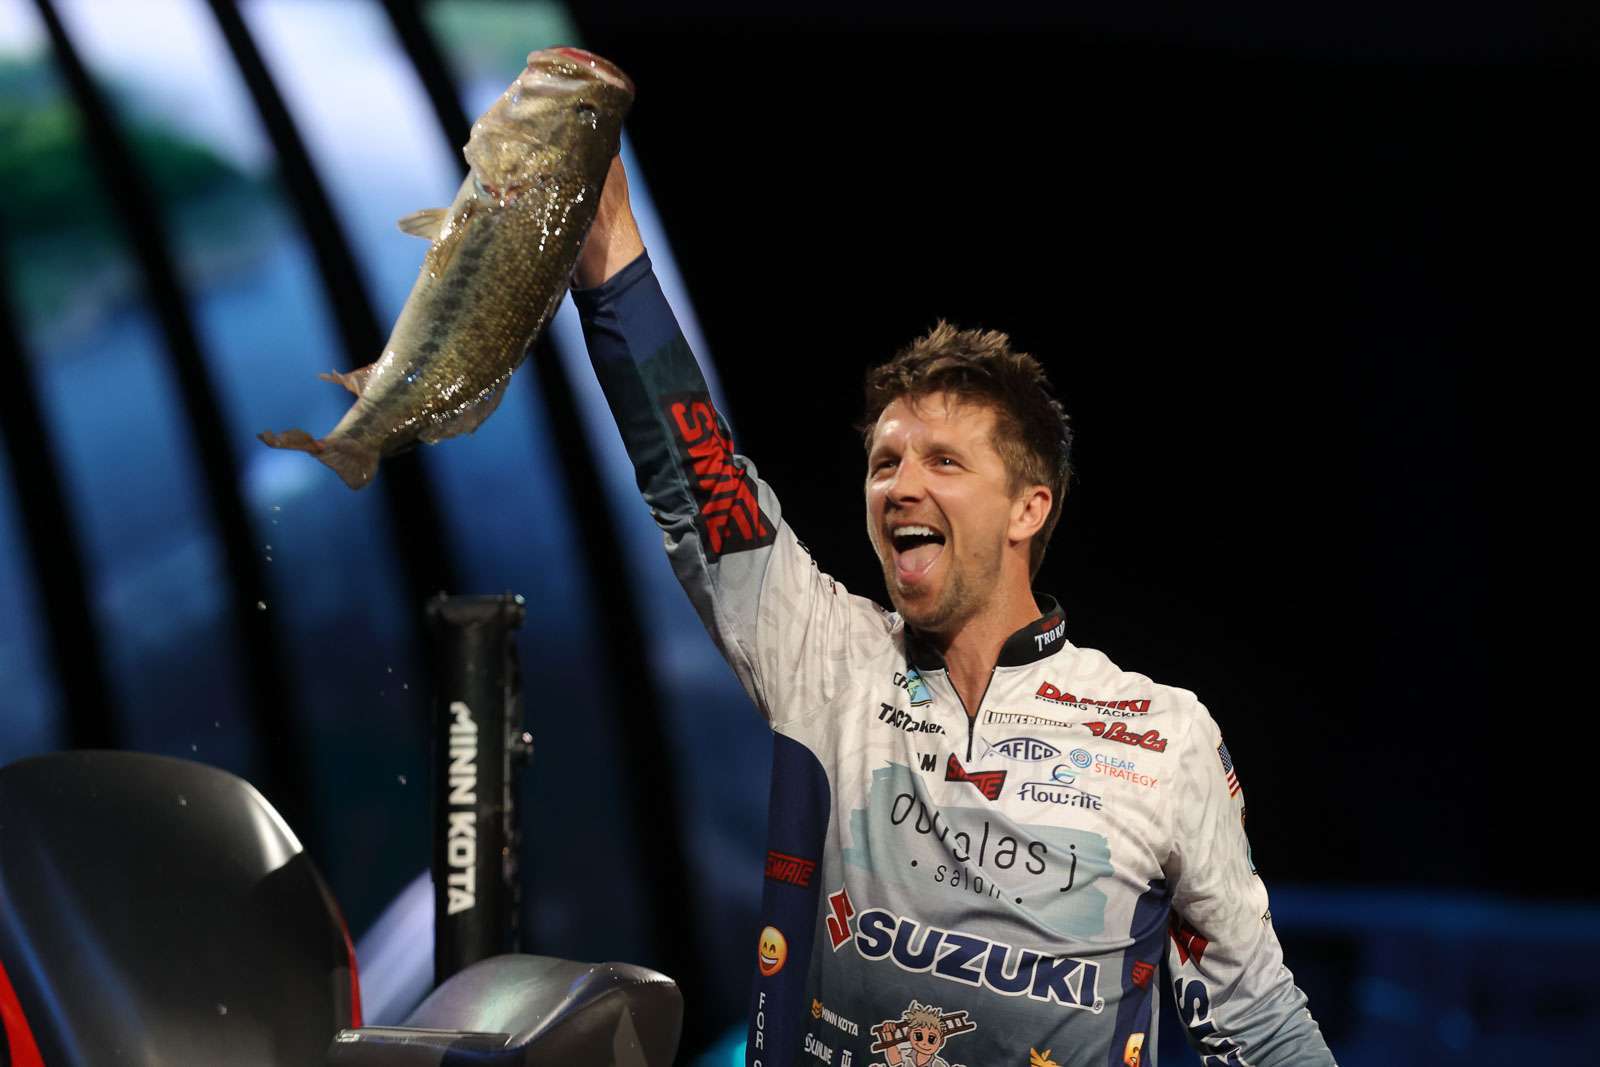 Pipkens was among those falling short with two fish going 10-10, but that moved him to 17th as one of only 19 bags topping 10 pounds. Pipkens took the dayâs big bass honors, but his big-eye 9-0 actually weighed 8-1, for which other anglers razzed him. Two fish on Championship Sunday left Pipkens in 24th place.